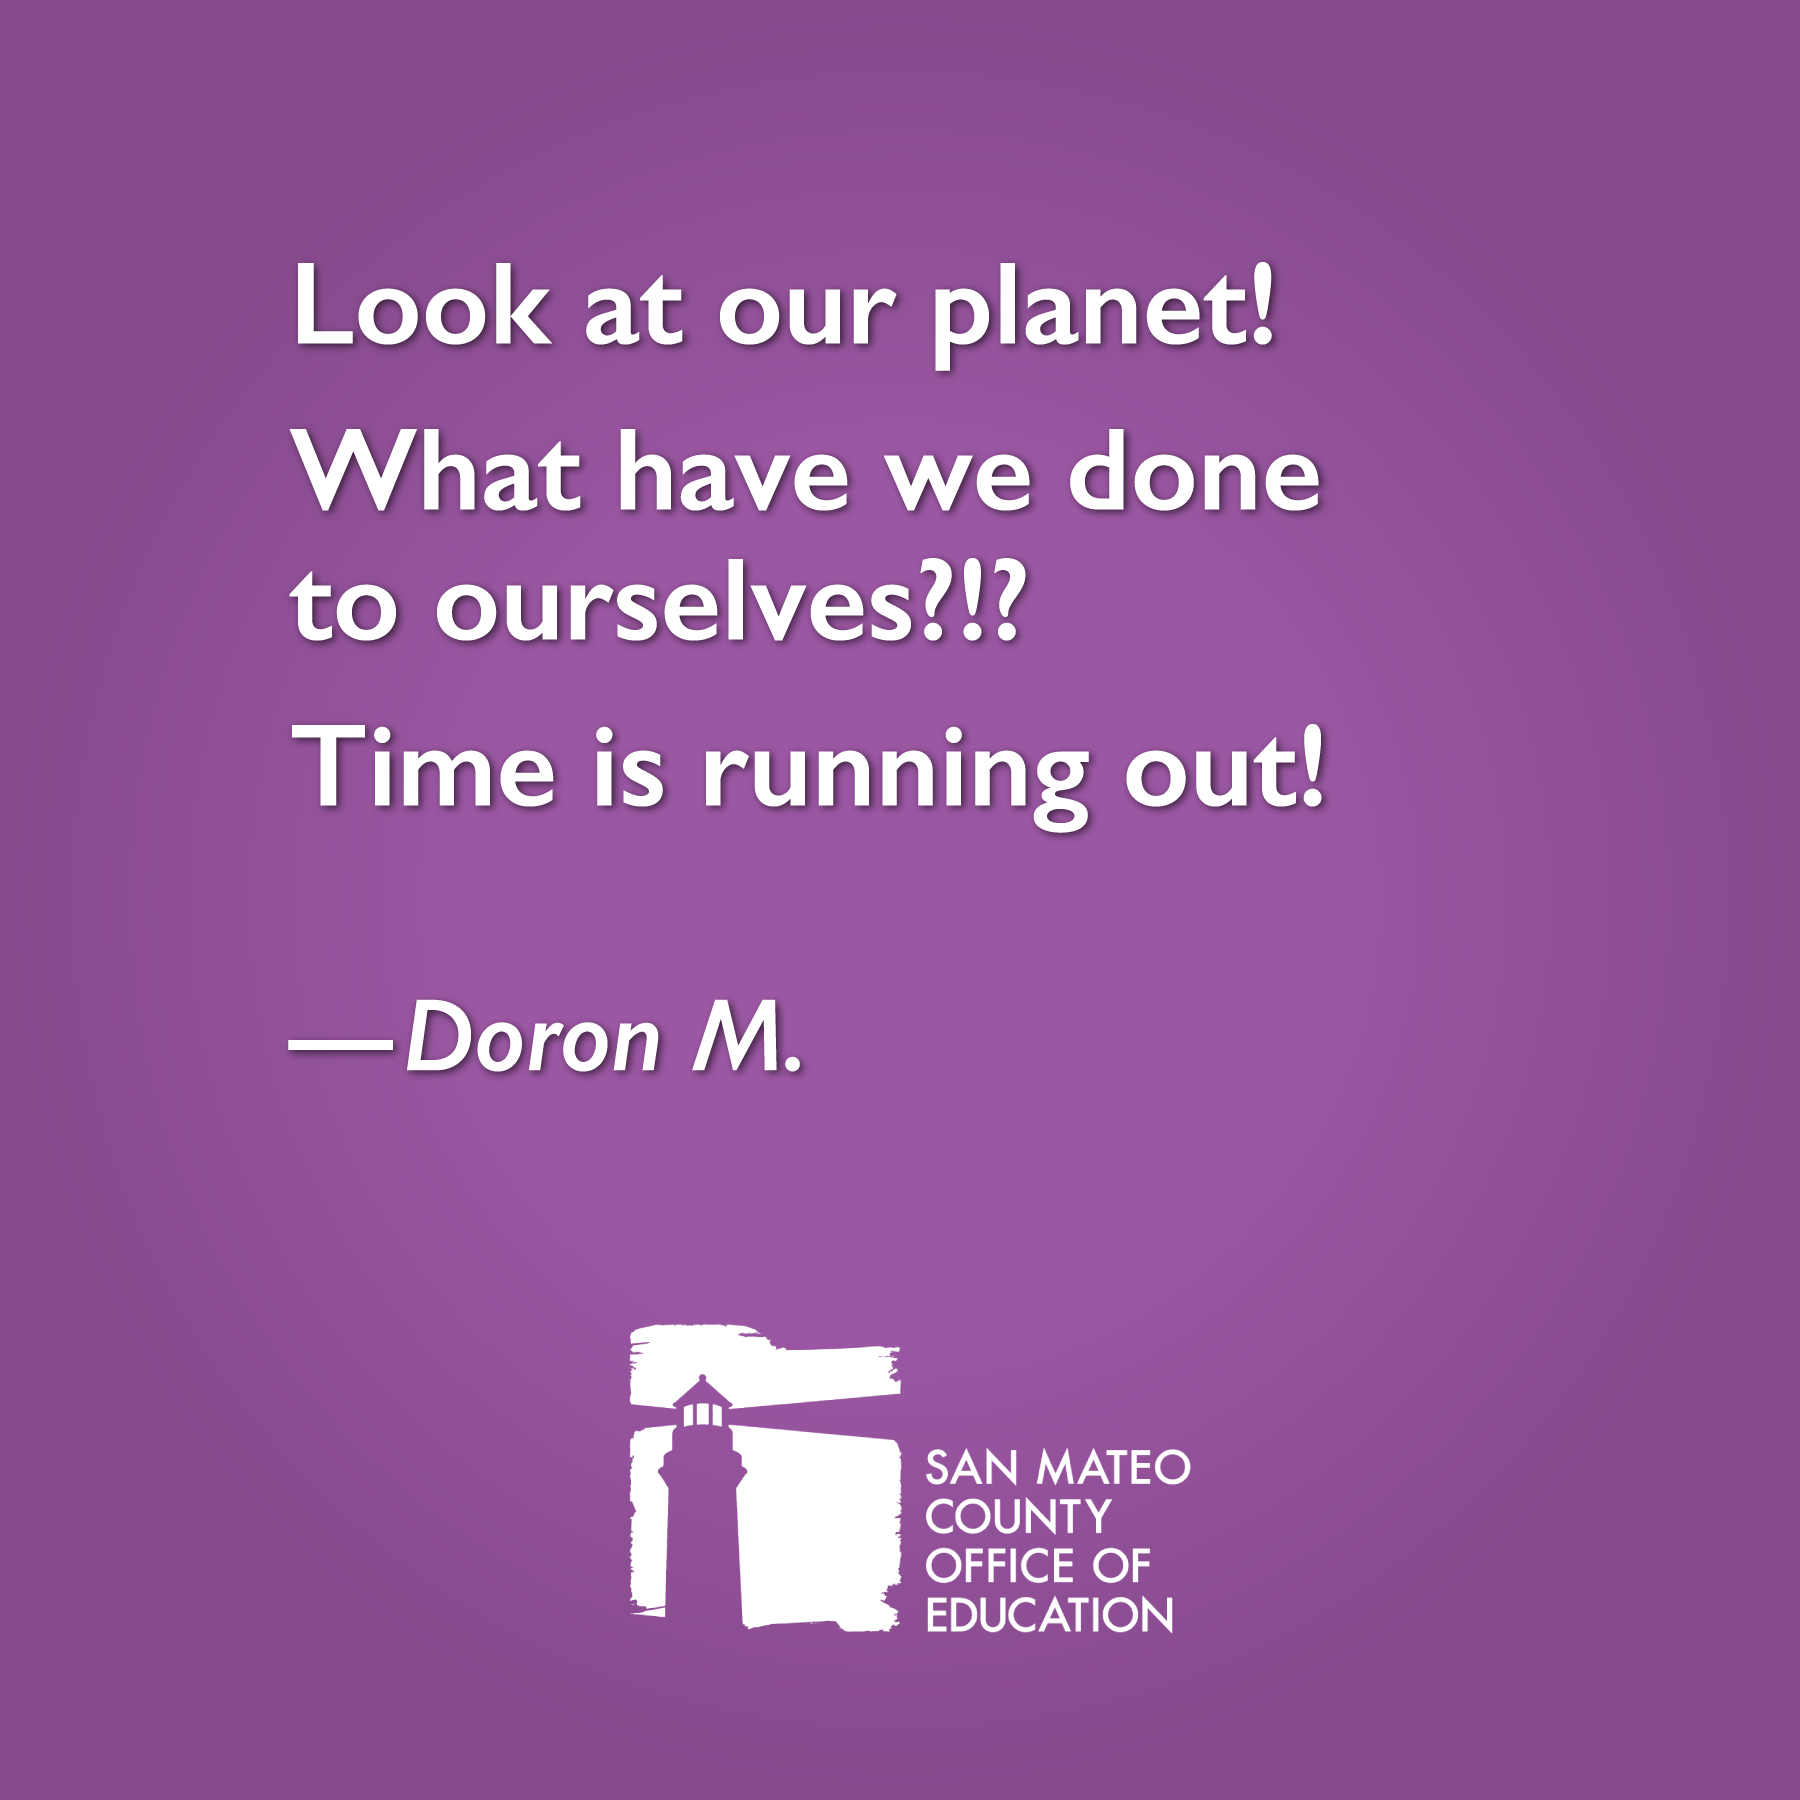 Look at our planet! What have we done to ourselves?!? Time is running out! Written by Doron M.